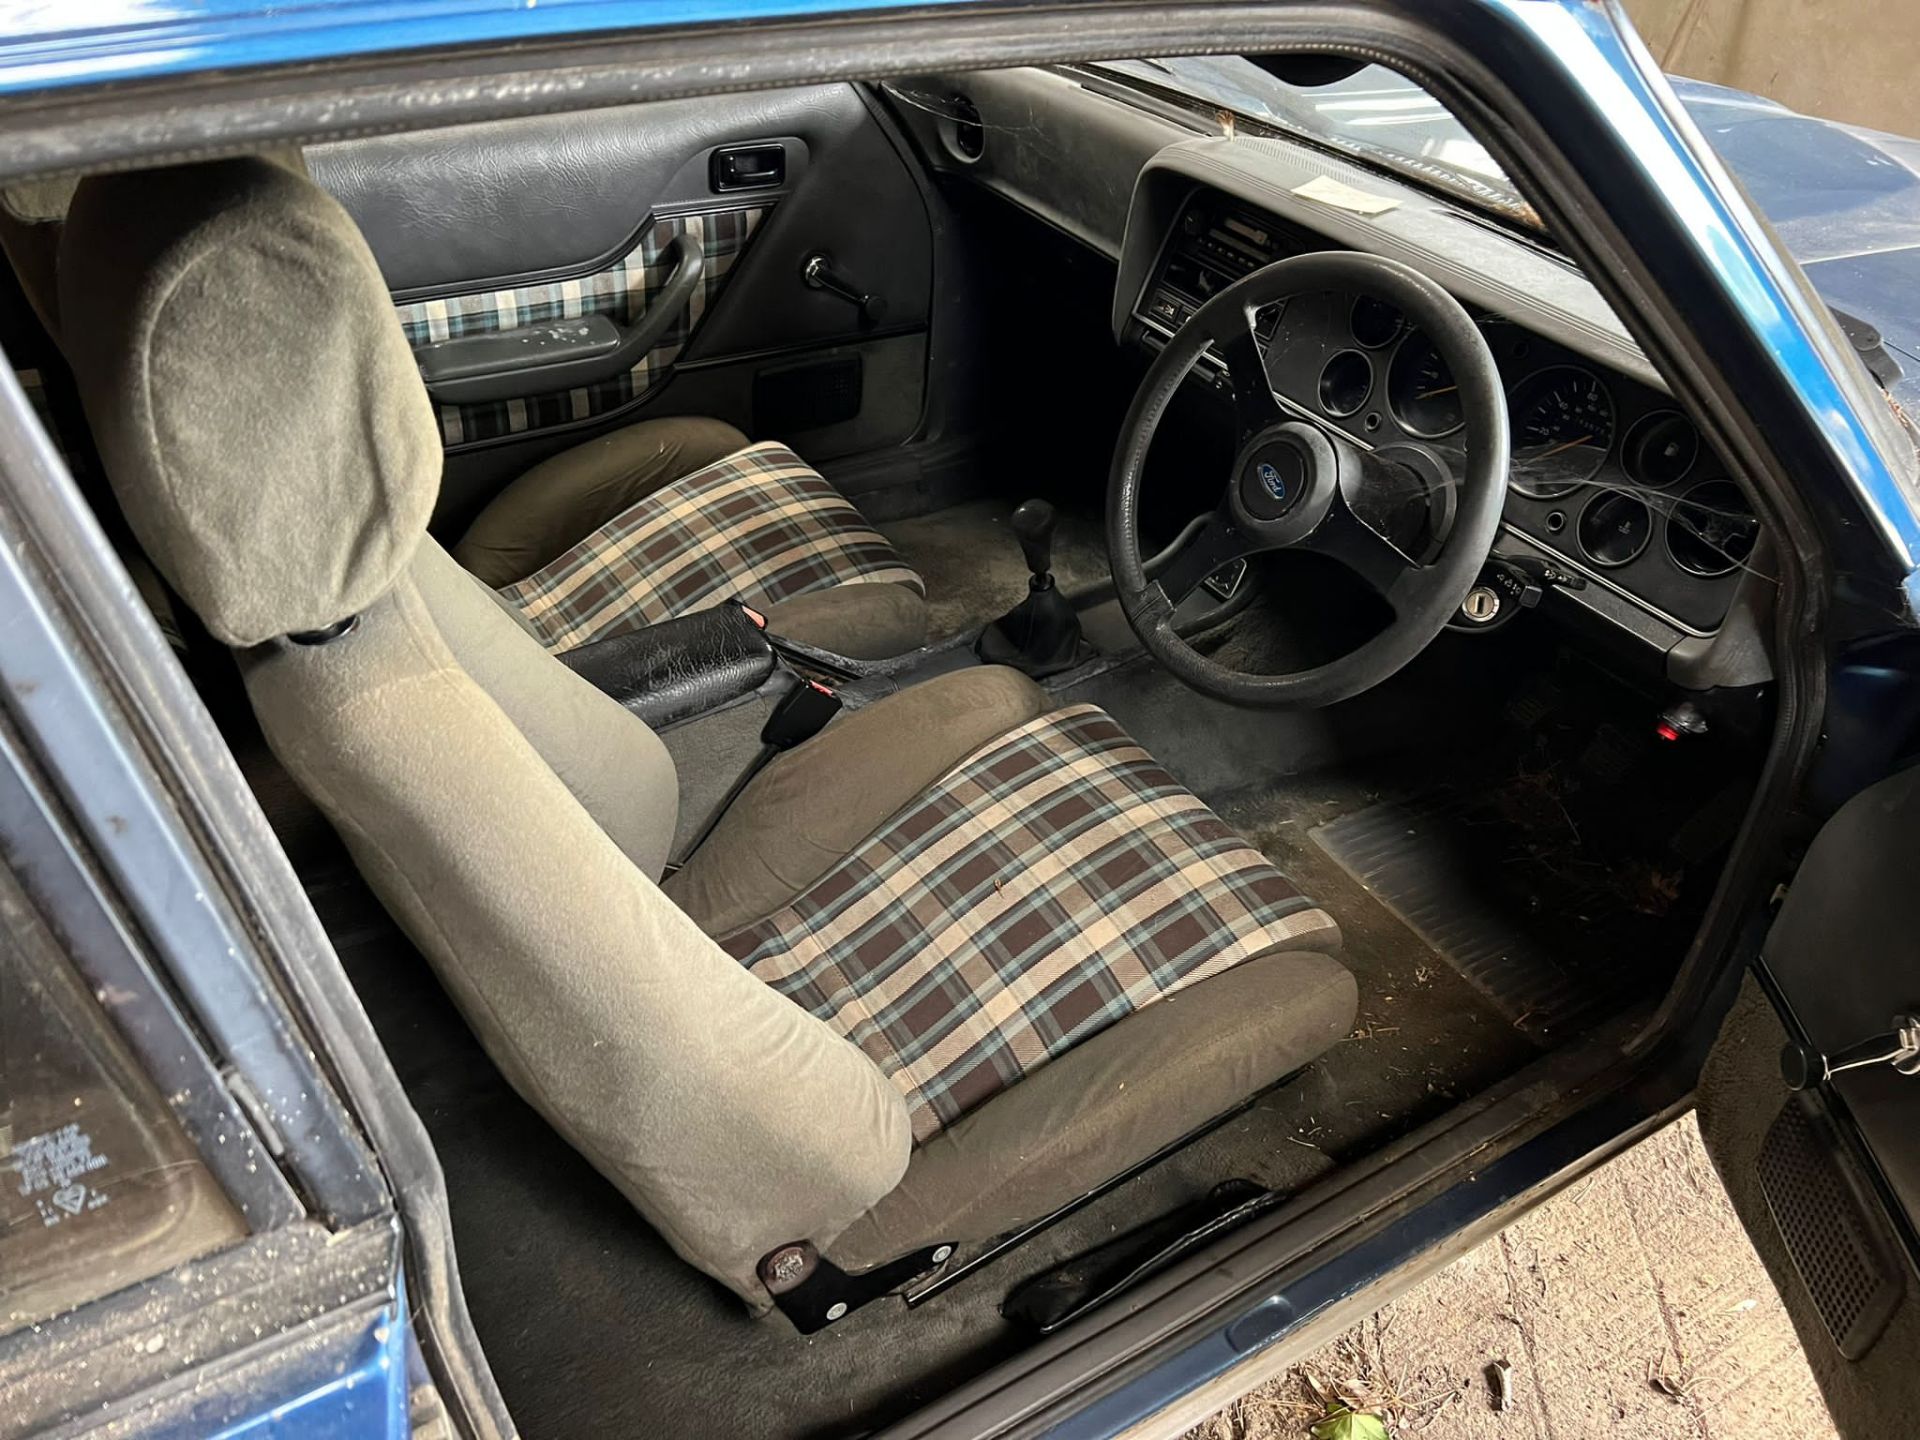 Ford Capri MkIII 2.8 Injection 1981 - Barn Find - Image 39 of 44